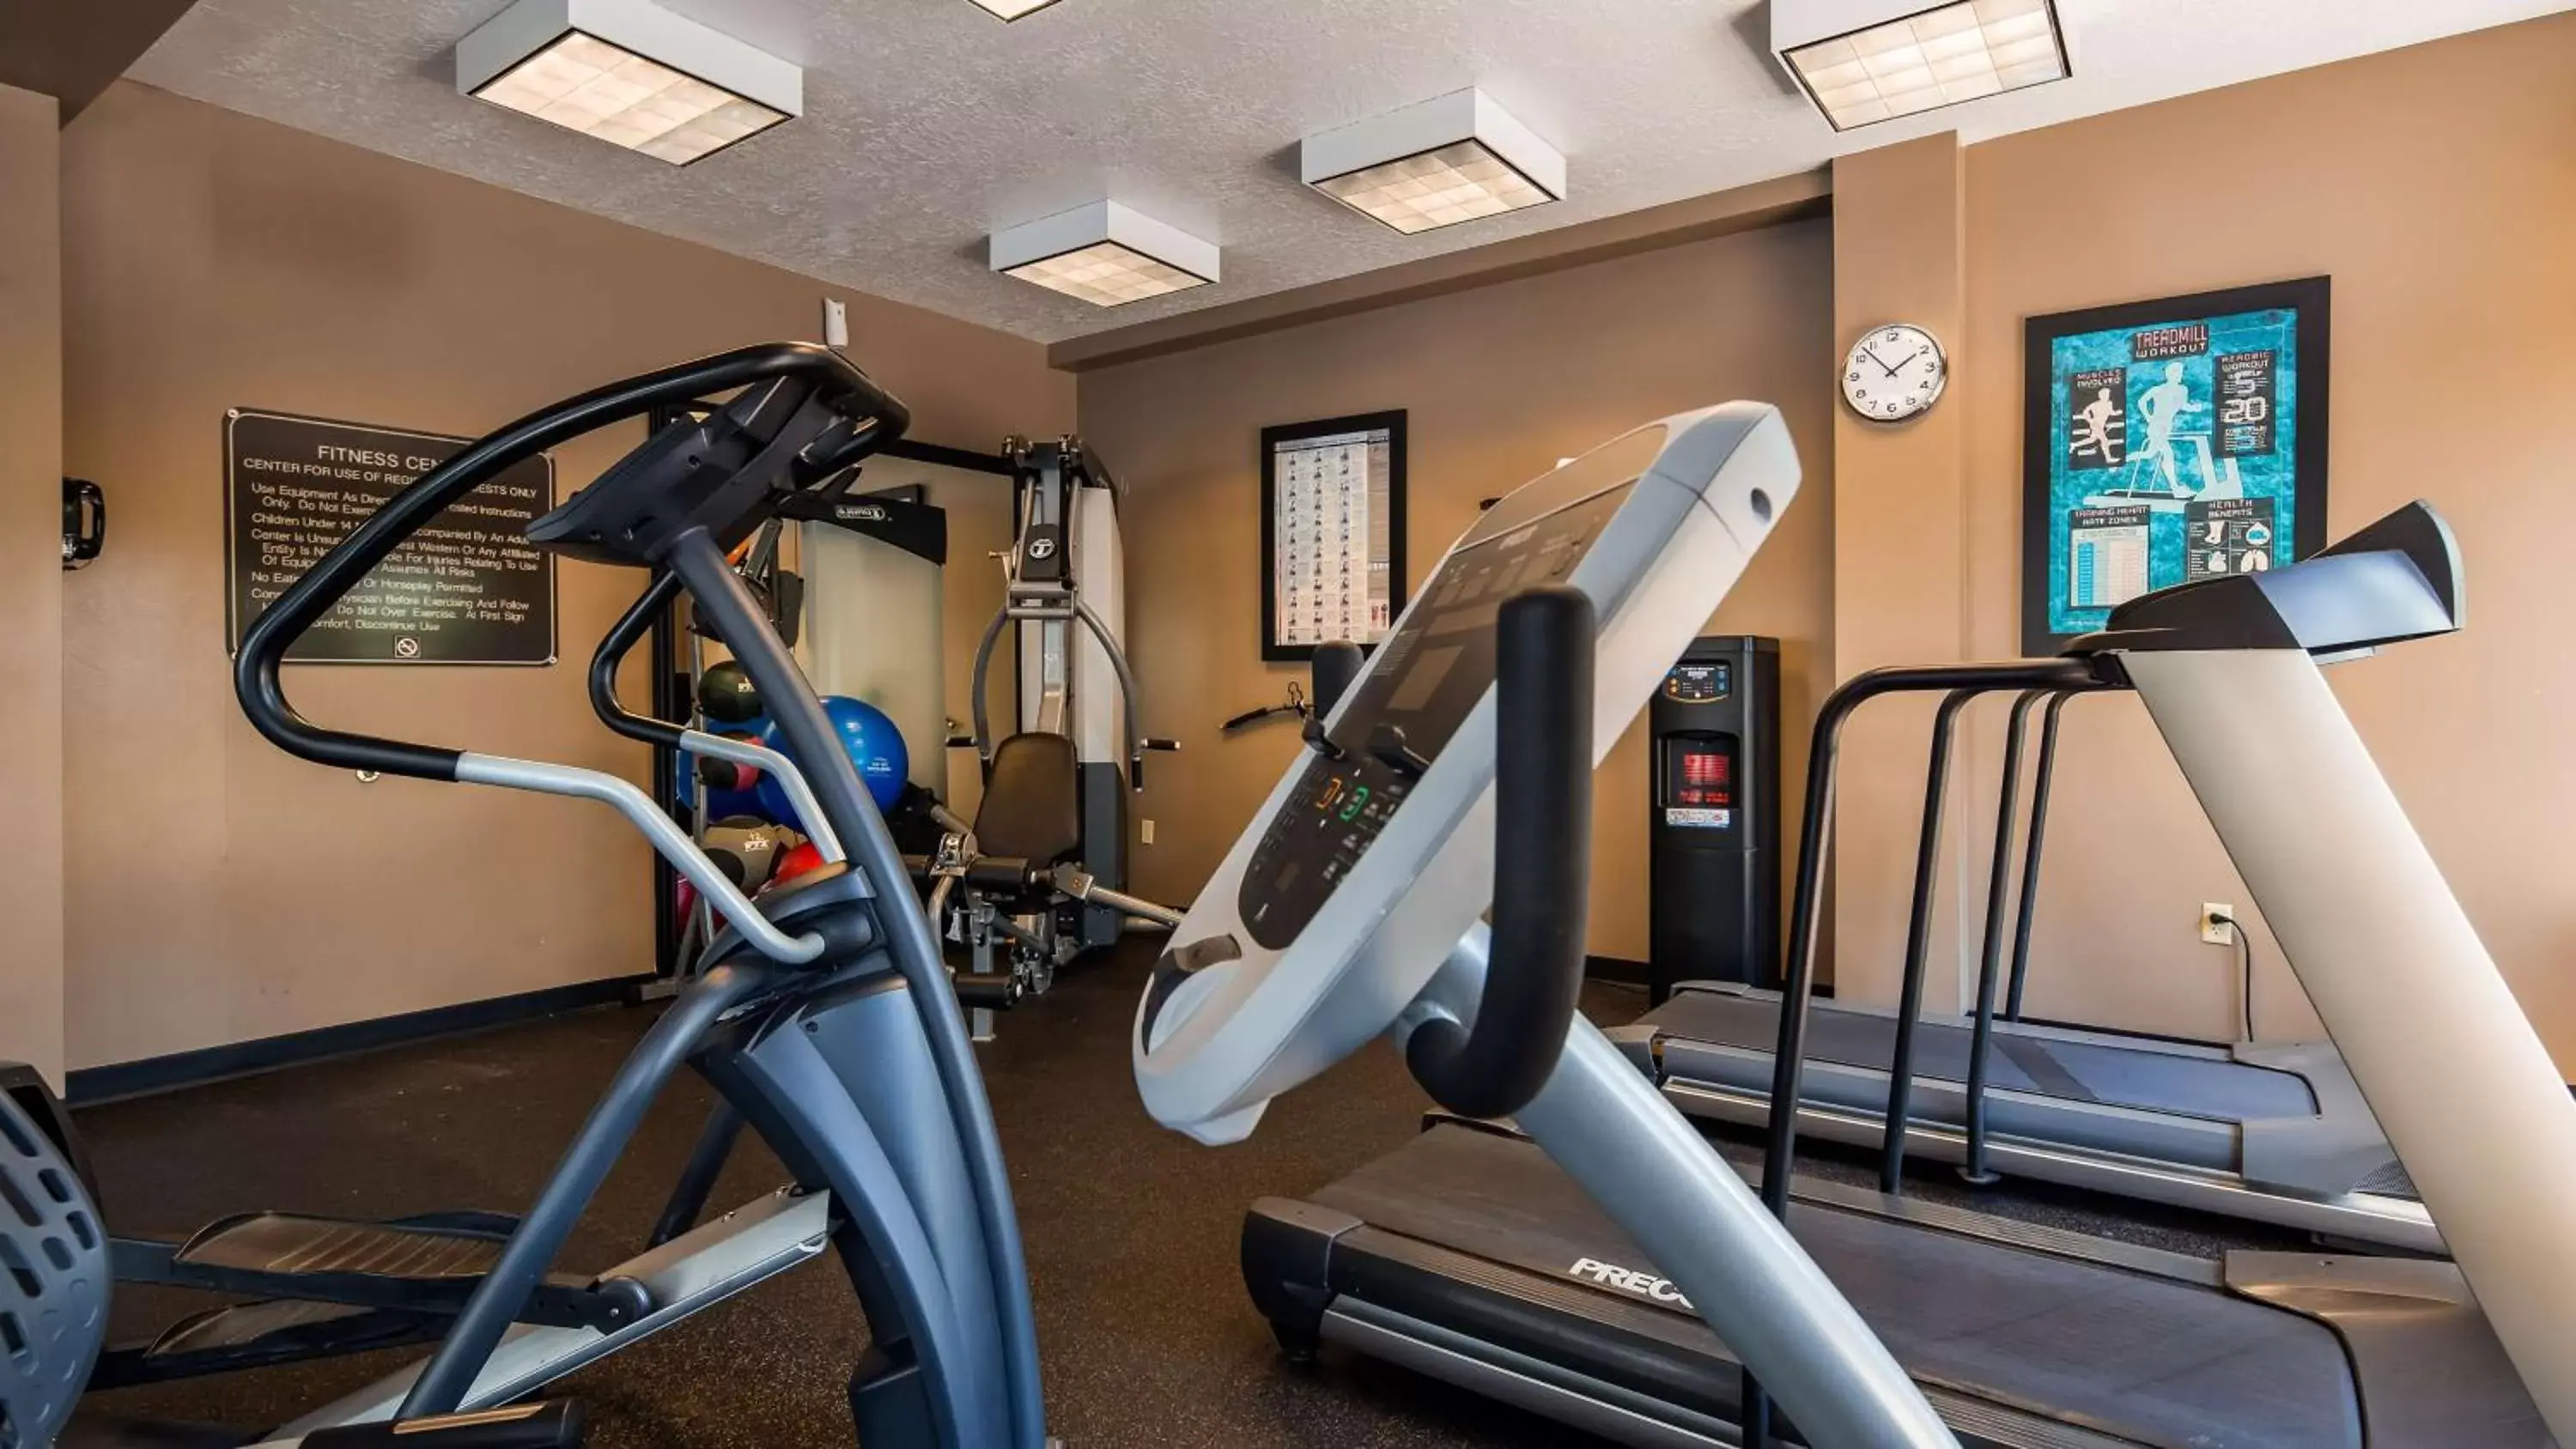 Fitness centre/facilities, Fitness Center/Facilities in Best Western Plus Cotton Tree Inn